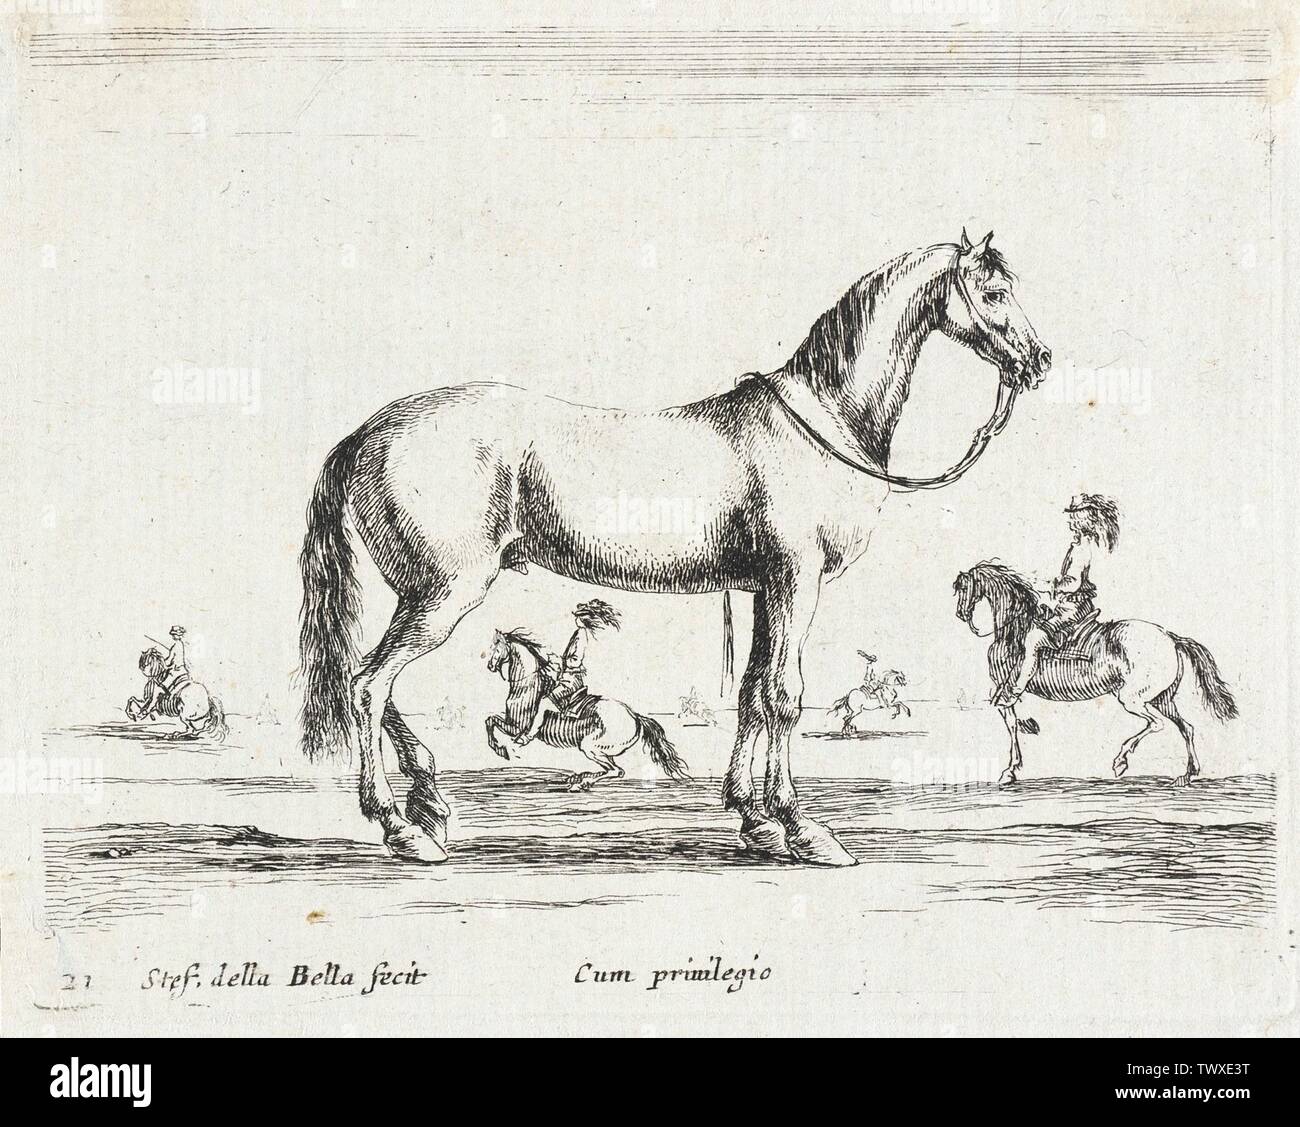 A Horse;  Italy, 1641 Series: Diversi animali, pl. 21 Prints; etchings Etching Gift of Alfred and Esther Norris (M.83.318.6) Prints and Drawings; 1641date QS:P571,+1641-00-00T00:00:00Z/9; Stock Photo